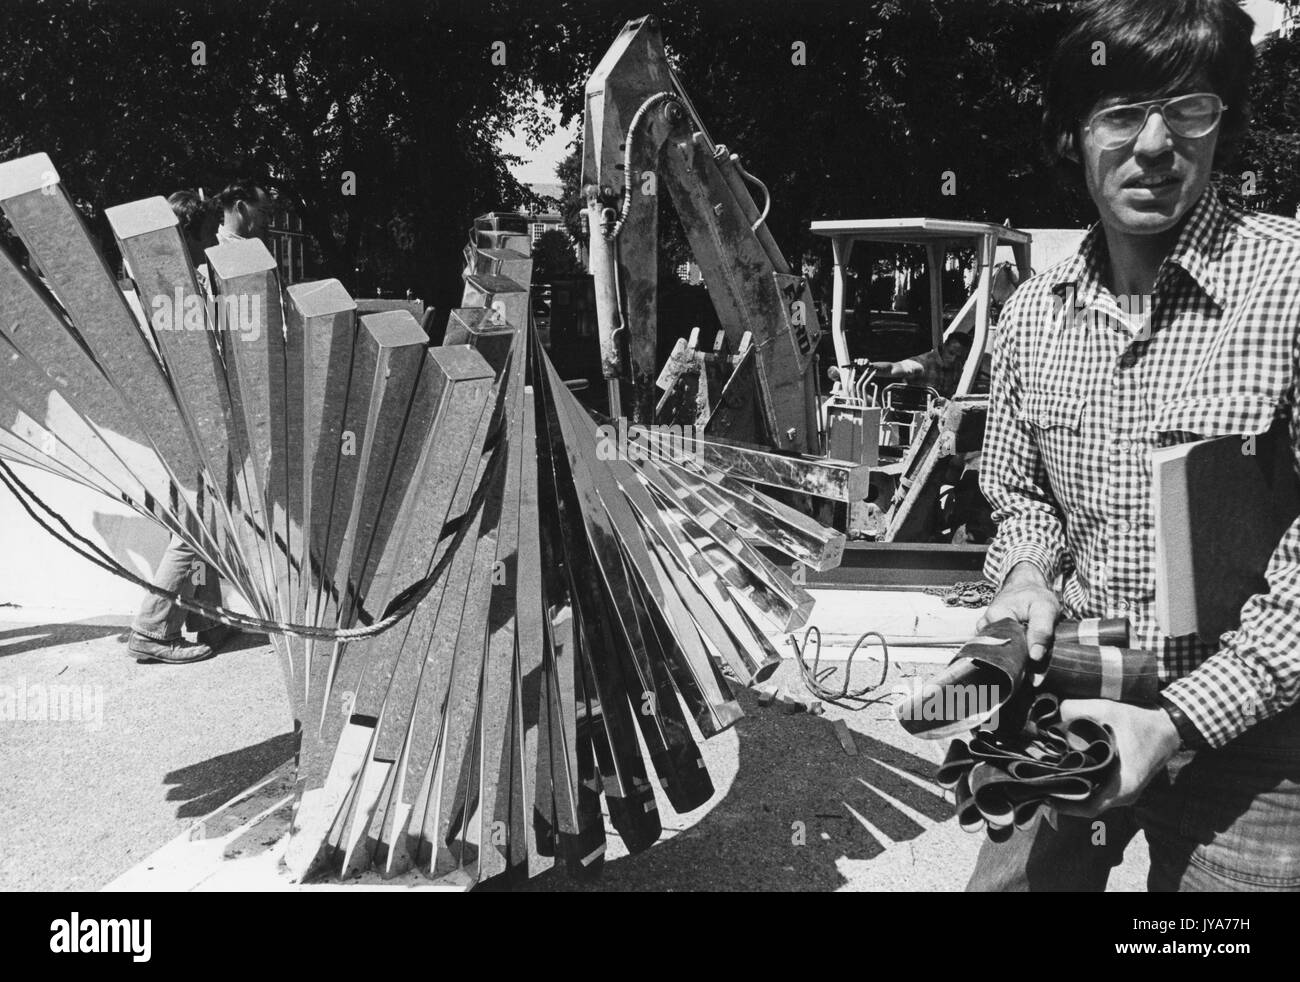 Construction of the centennial sculpture, created by sculptor David Brown to mark the one hundredth anniversary of the founding of Johns Hopkins University on the Homewood campus of the University in Baltimore, Maryland. 1976. Stock Photo